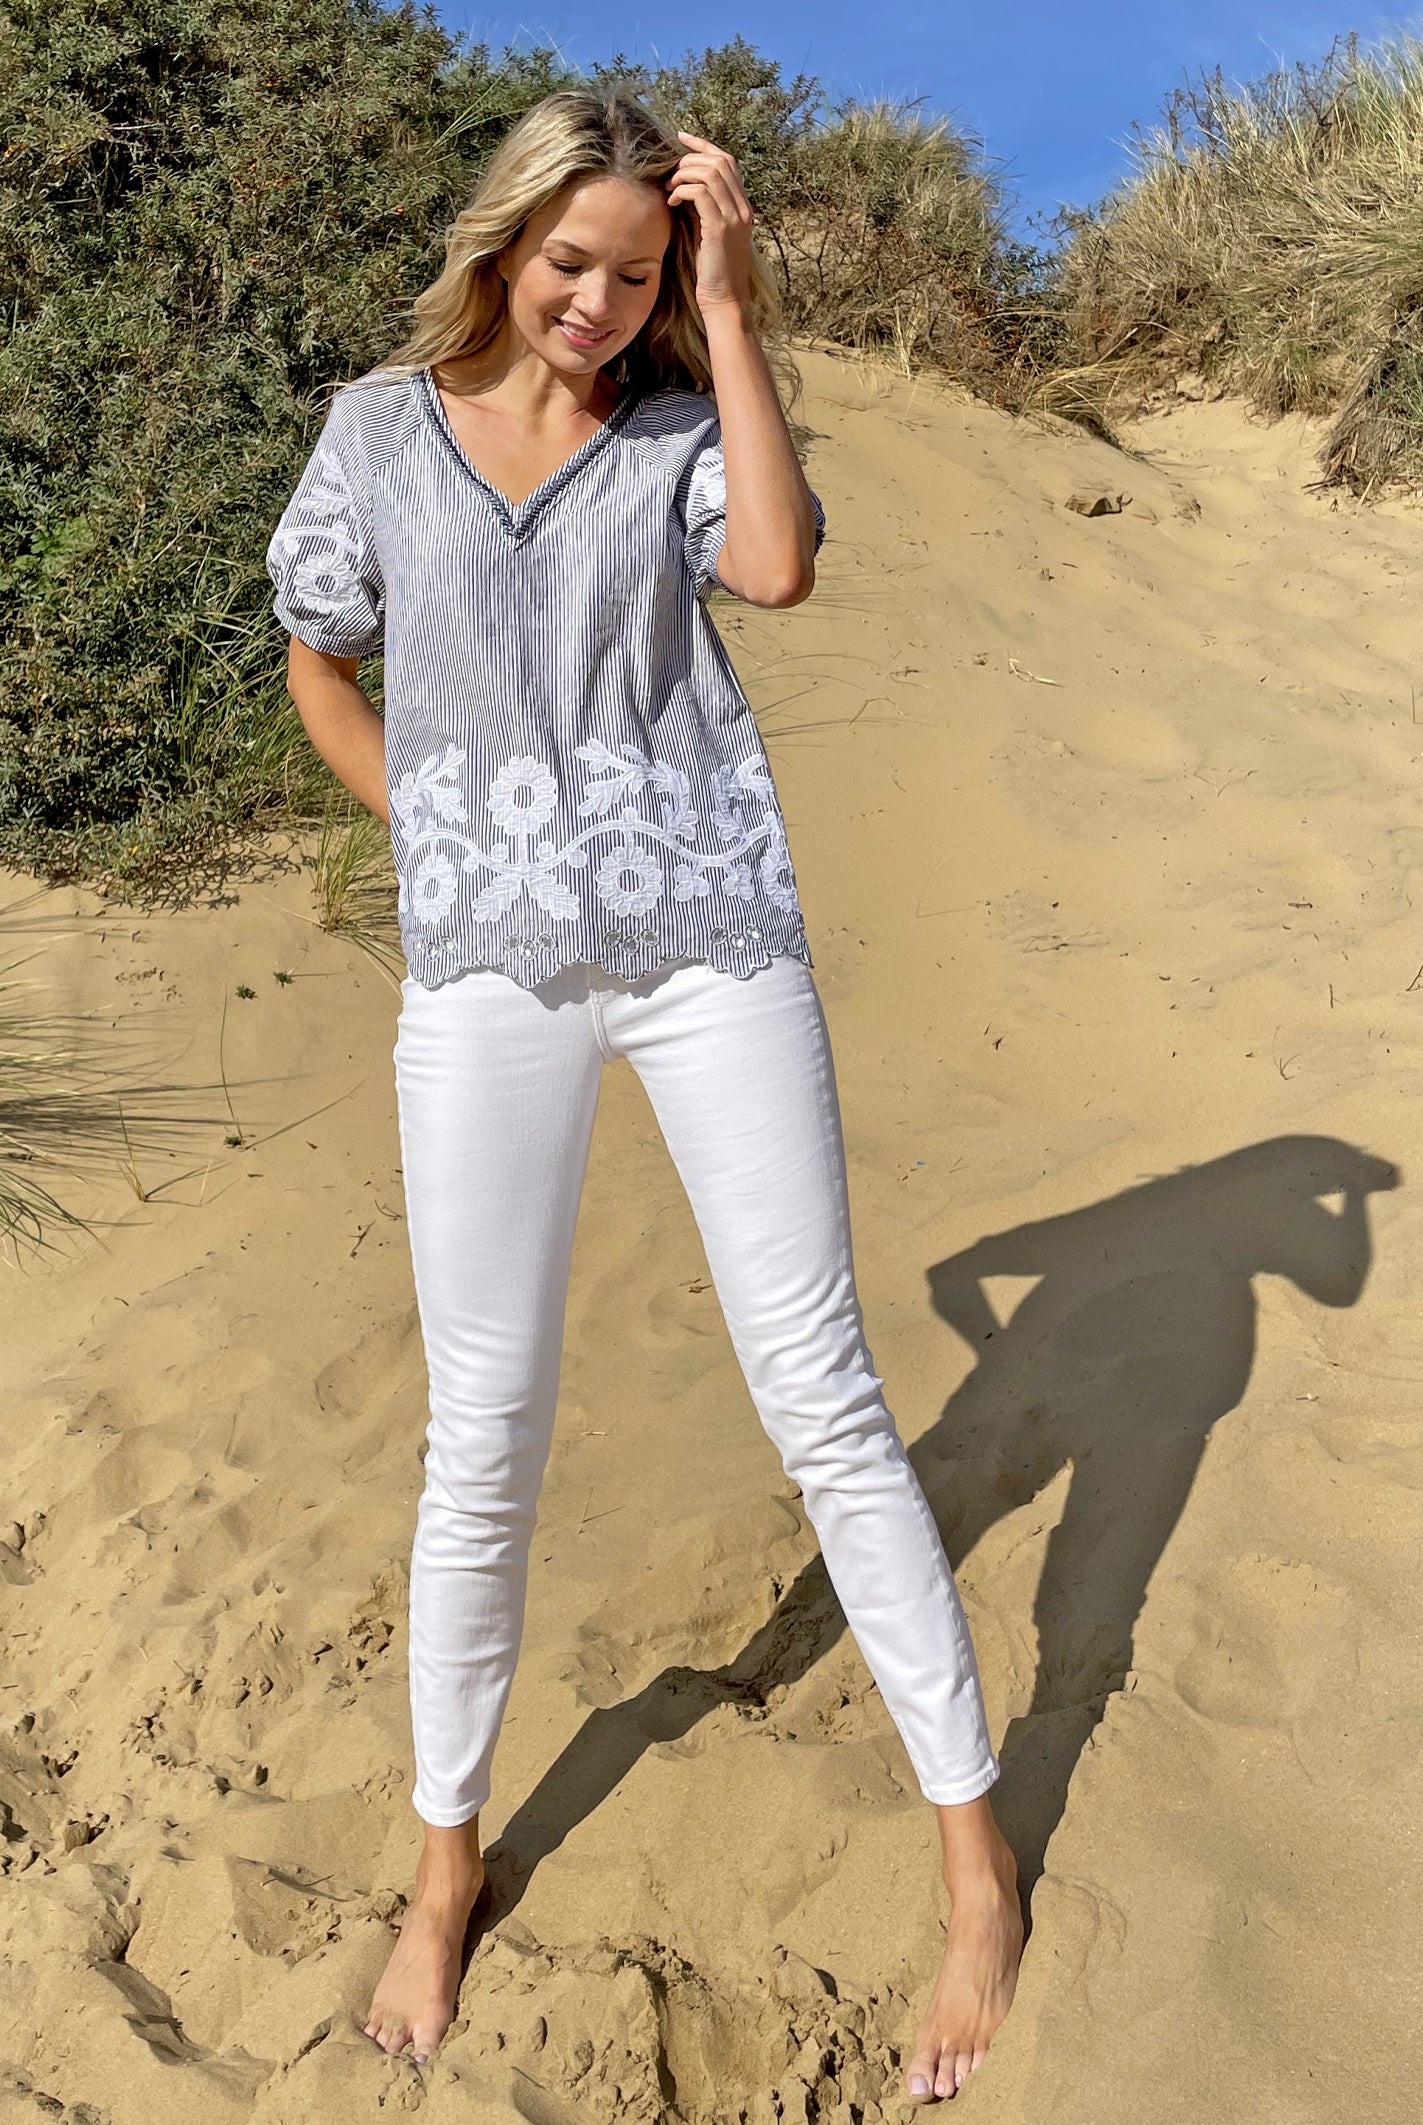  A model stood in sand dunes wearing a Rose and Rose striped cotton Anacapri top and white jeans.